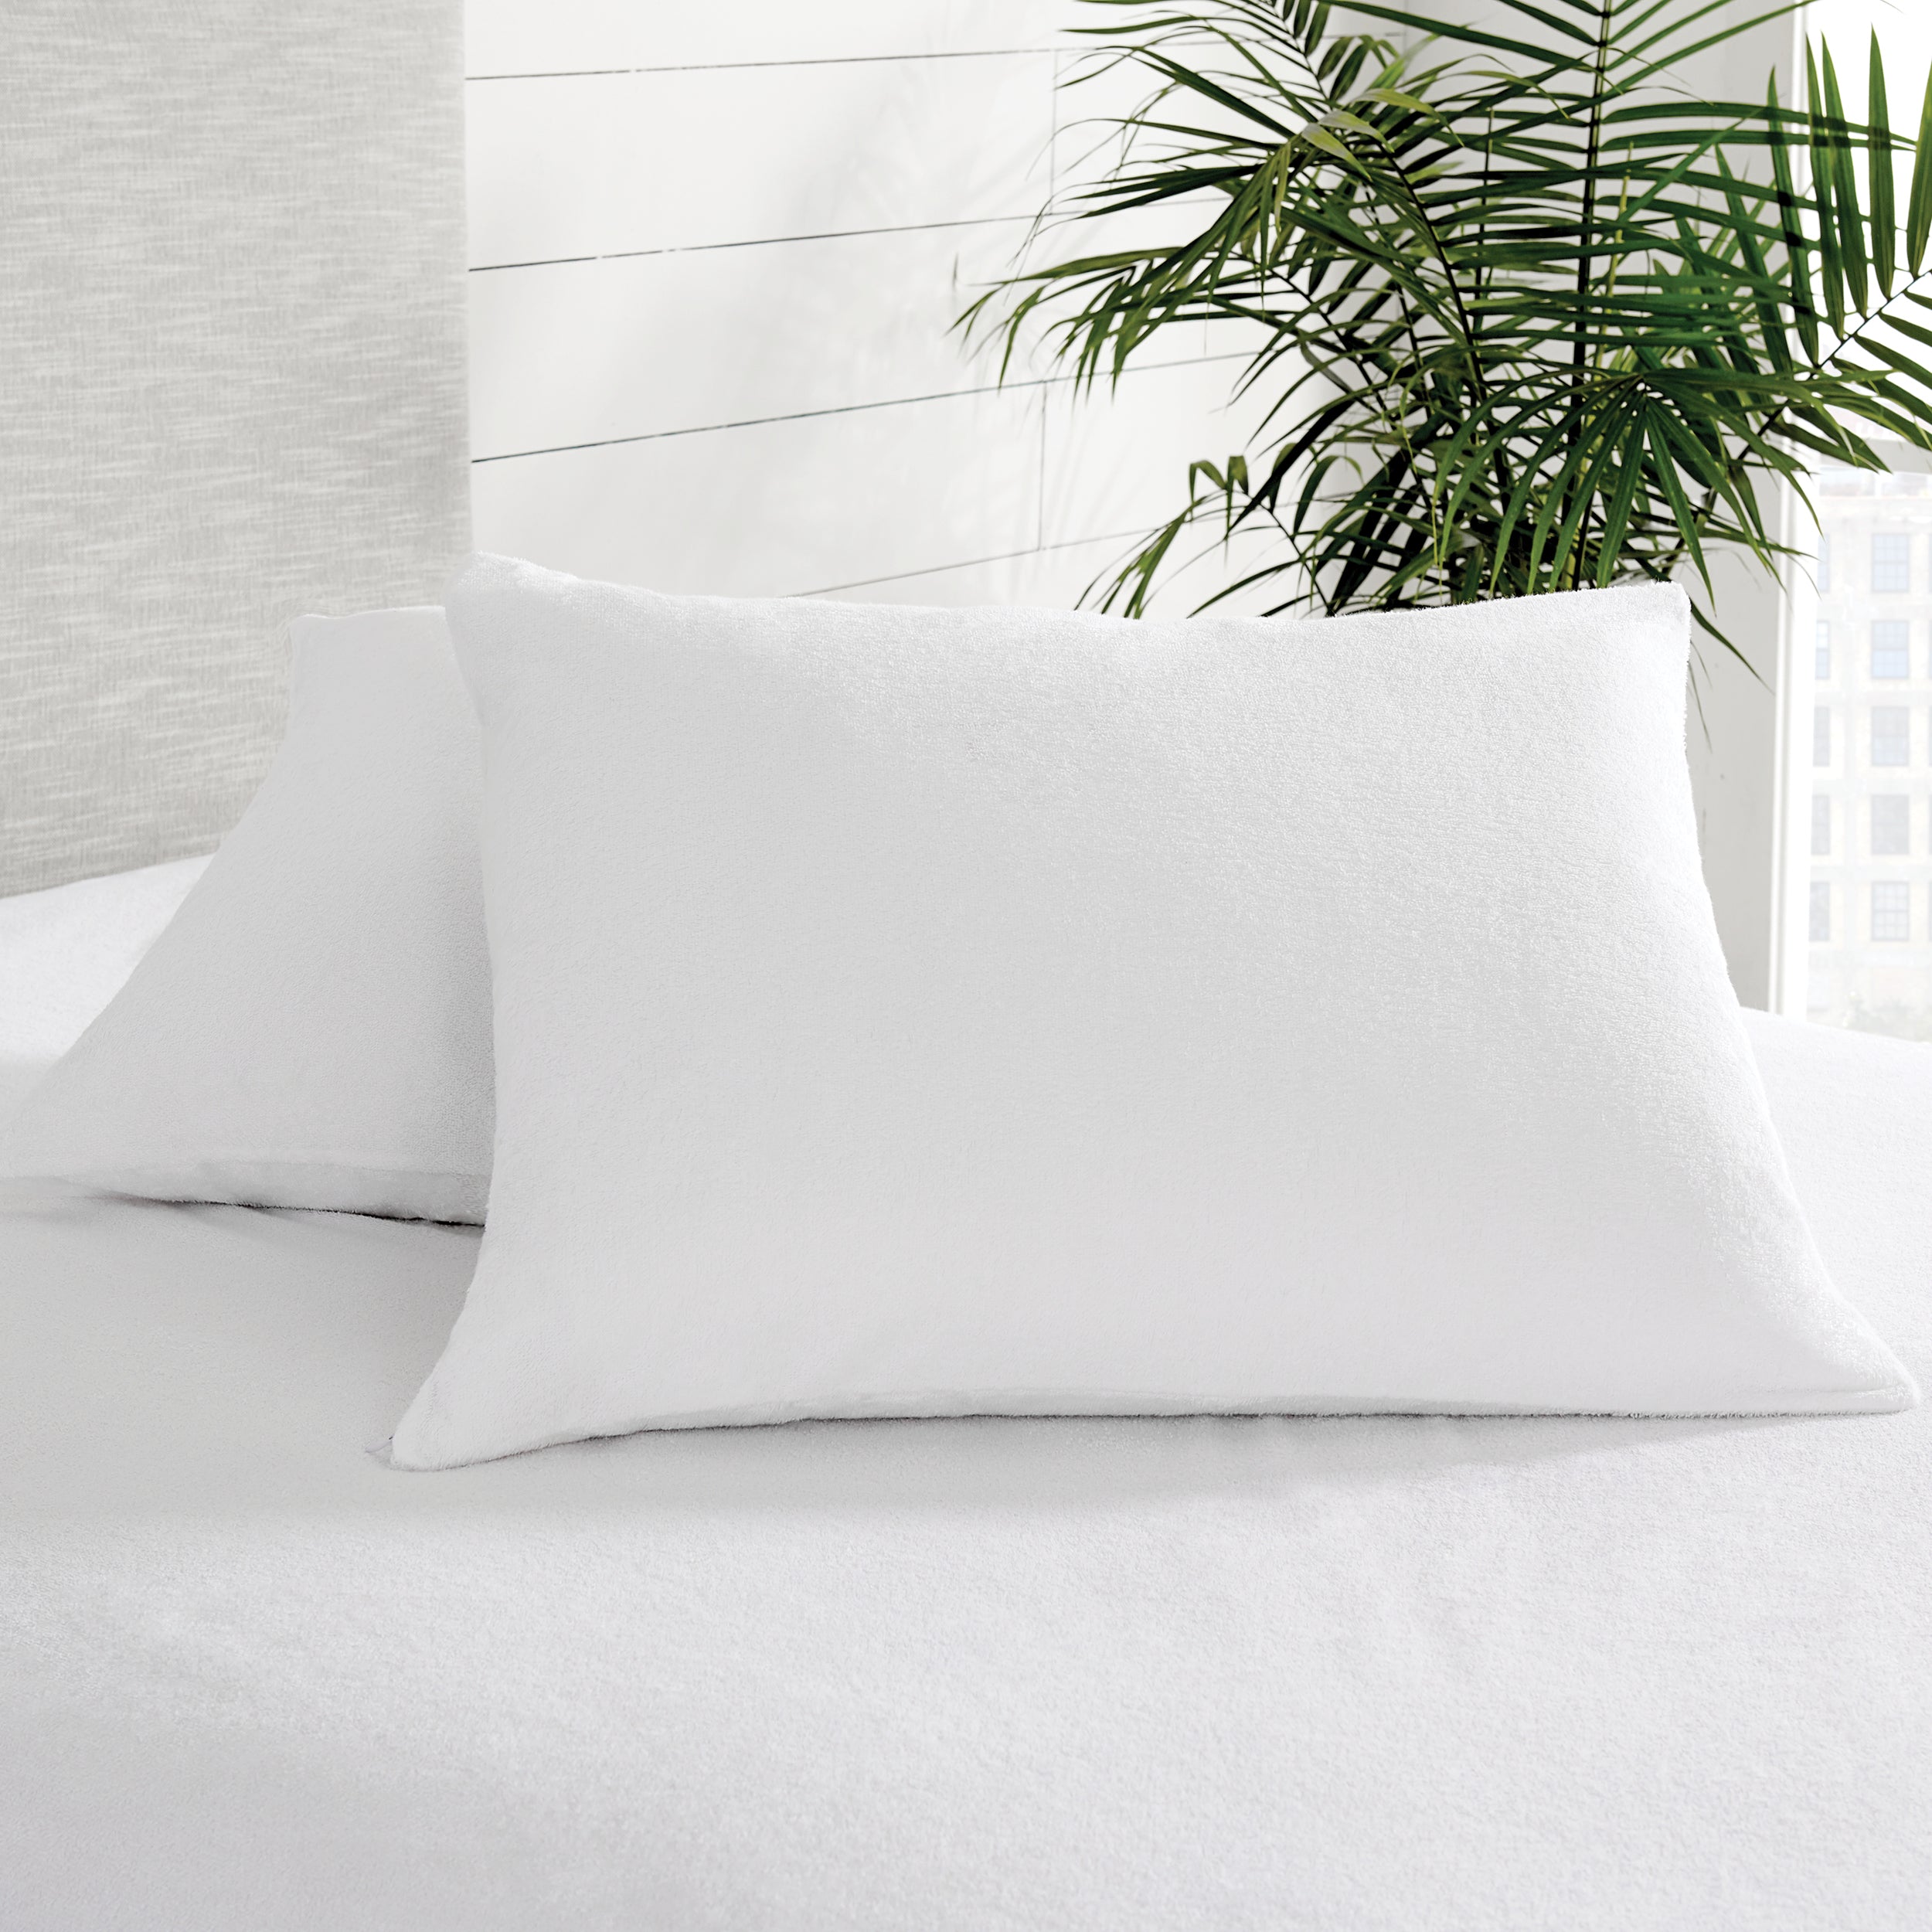 Images Extended Content Pillow Protector from Bare Home.